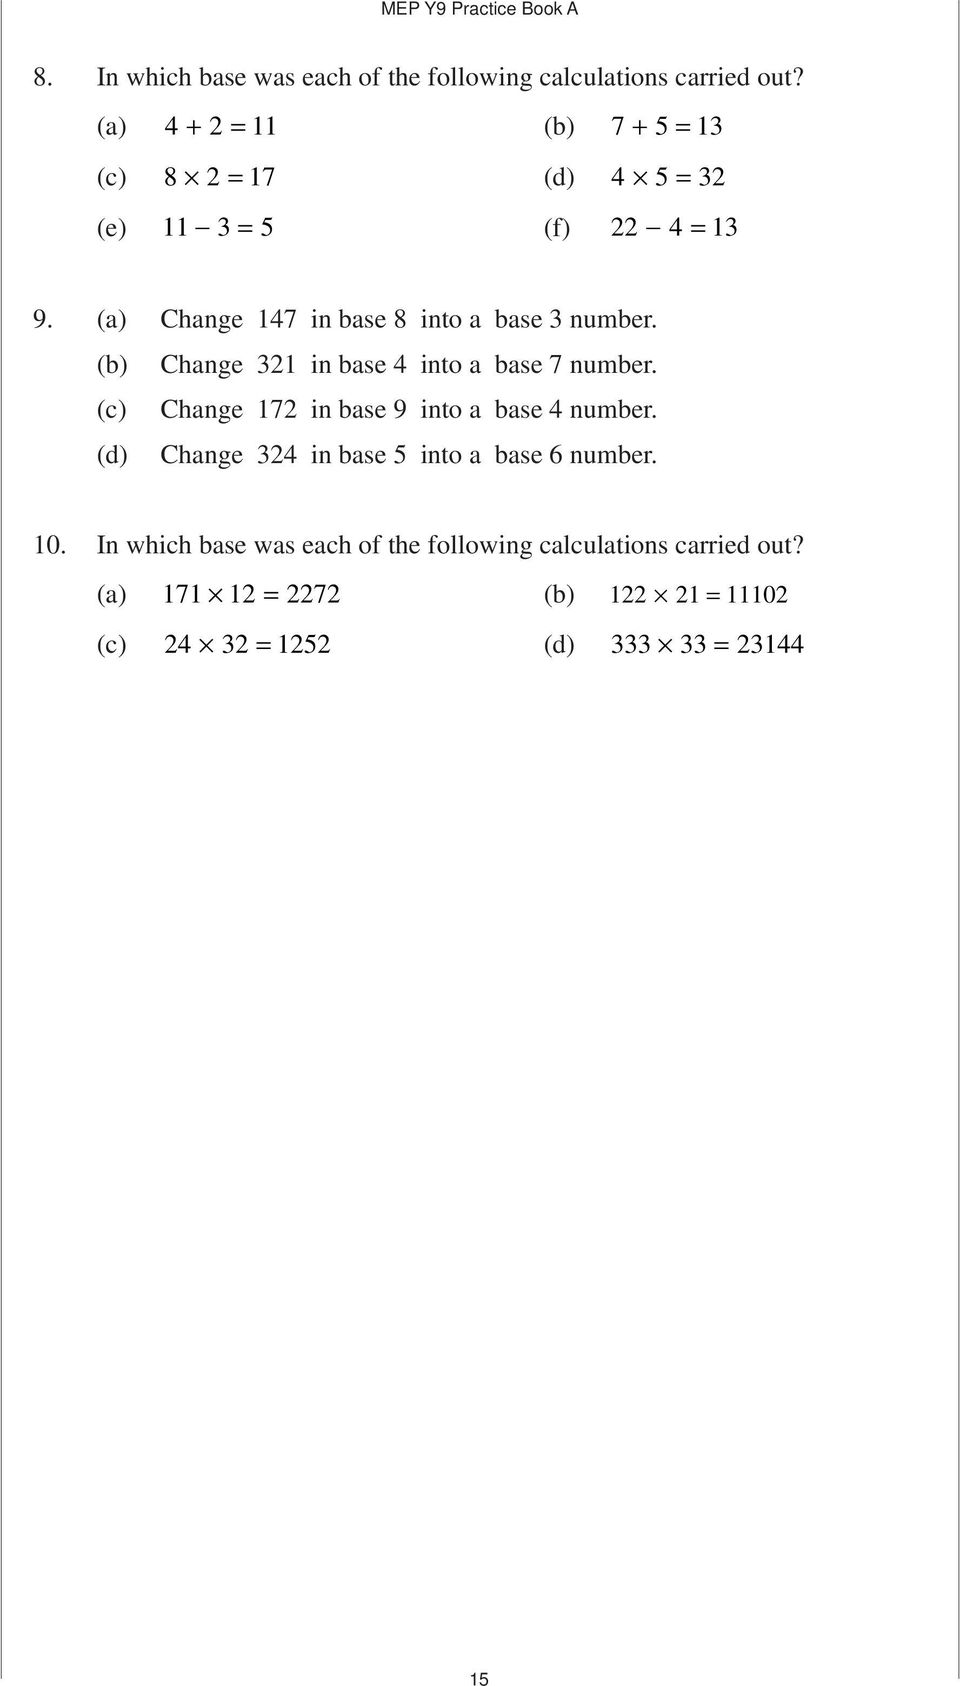 (a) Change 147 in base 8 into a base 3 number. (b) Change 321 in base 4 into a base 7 number.